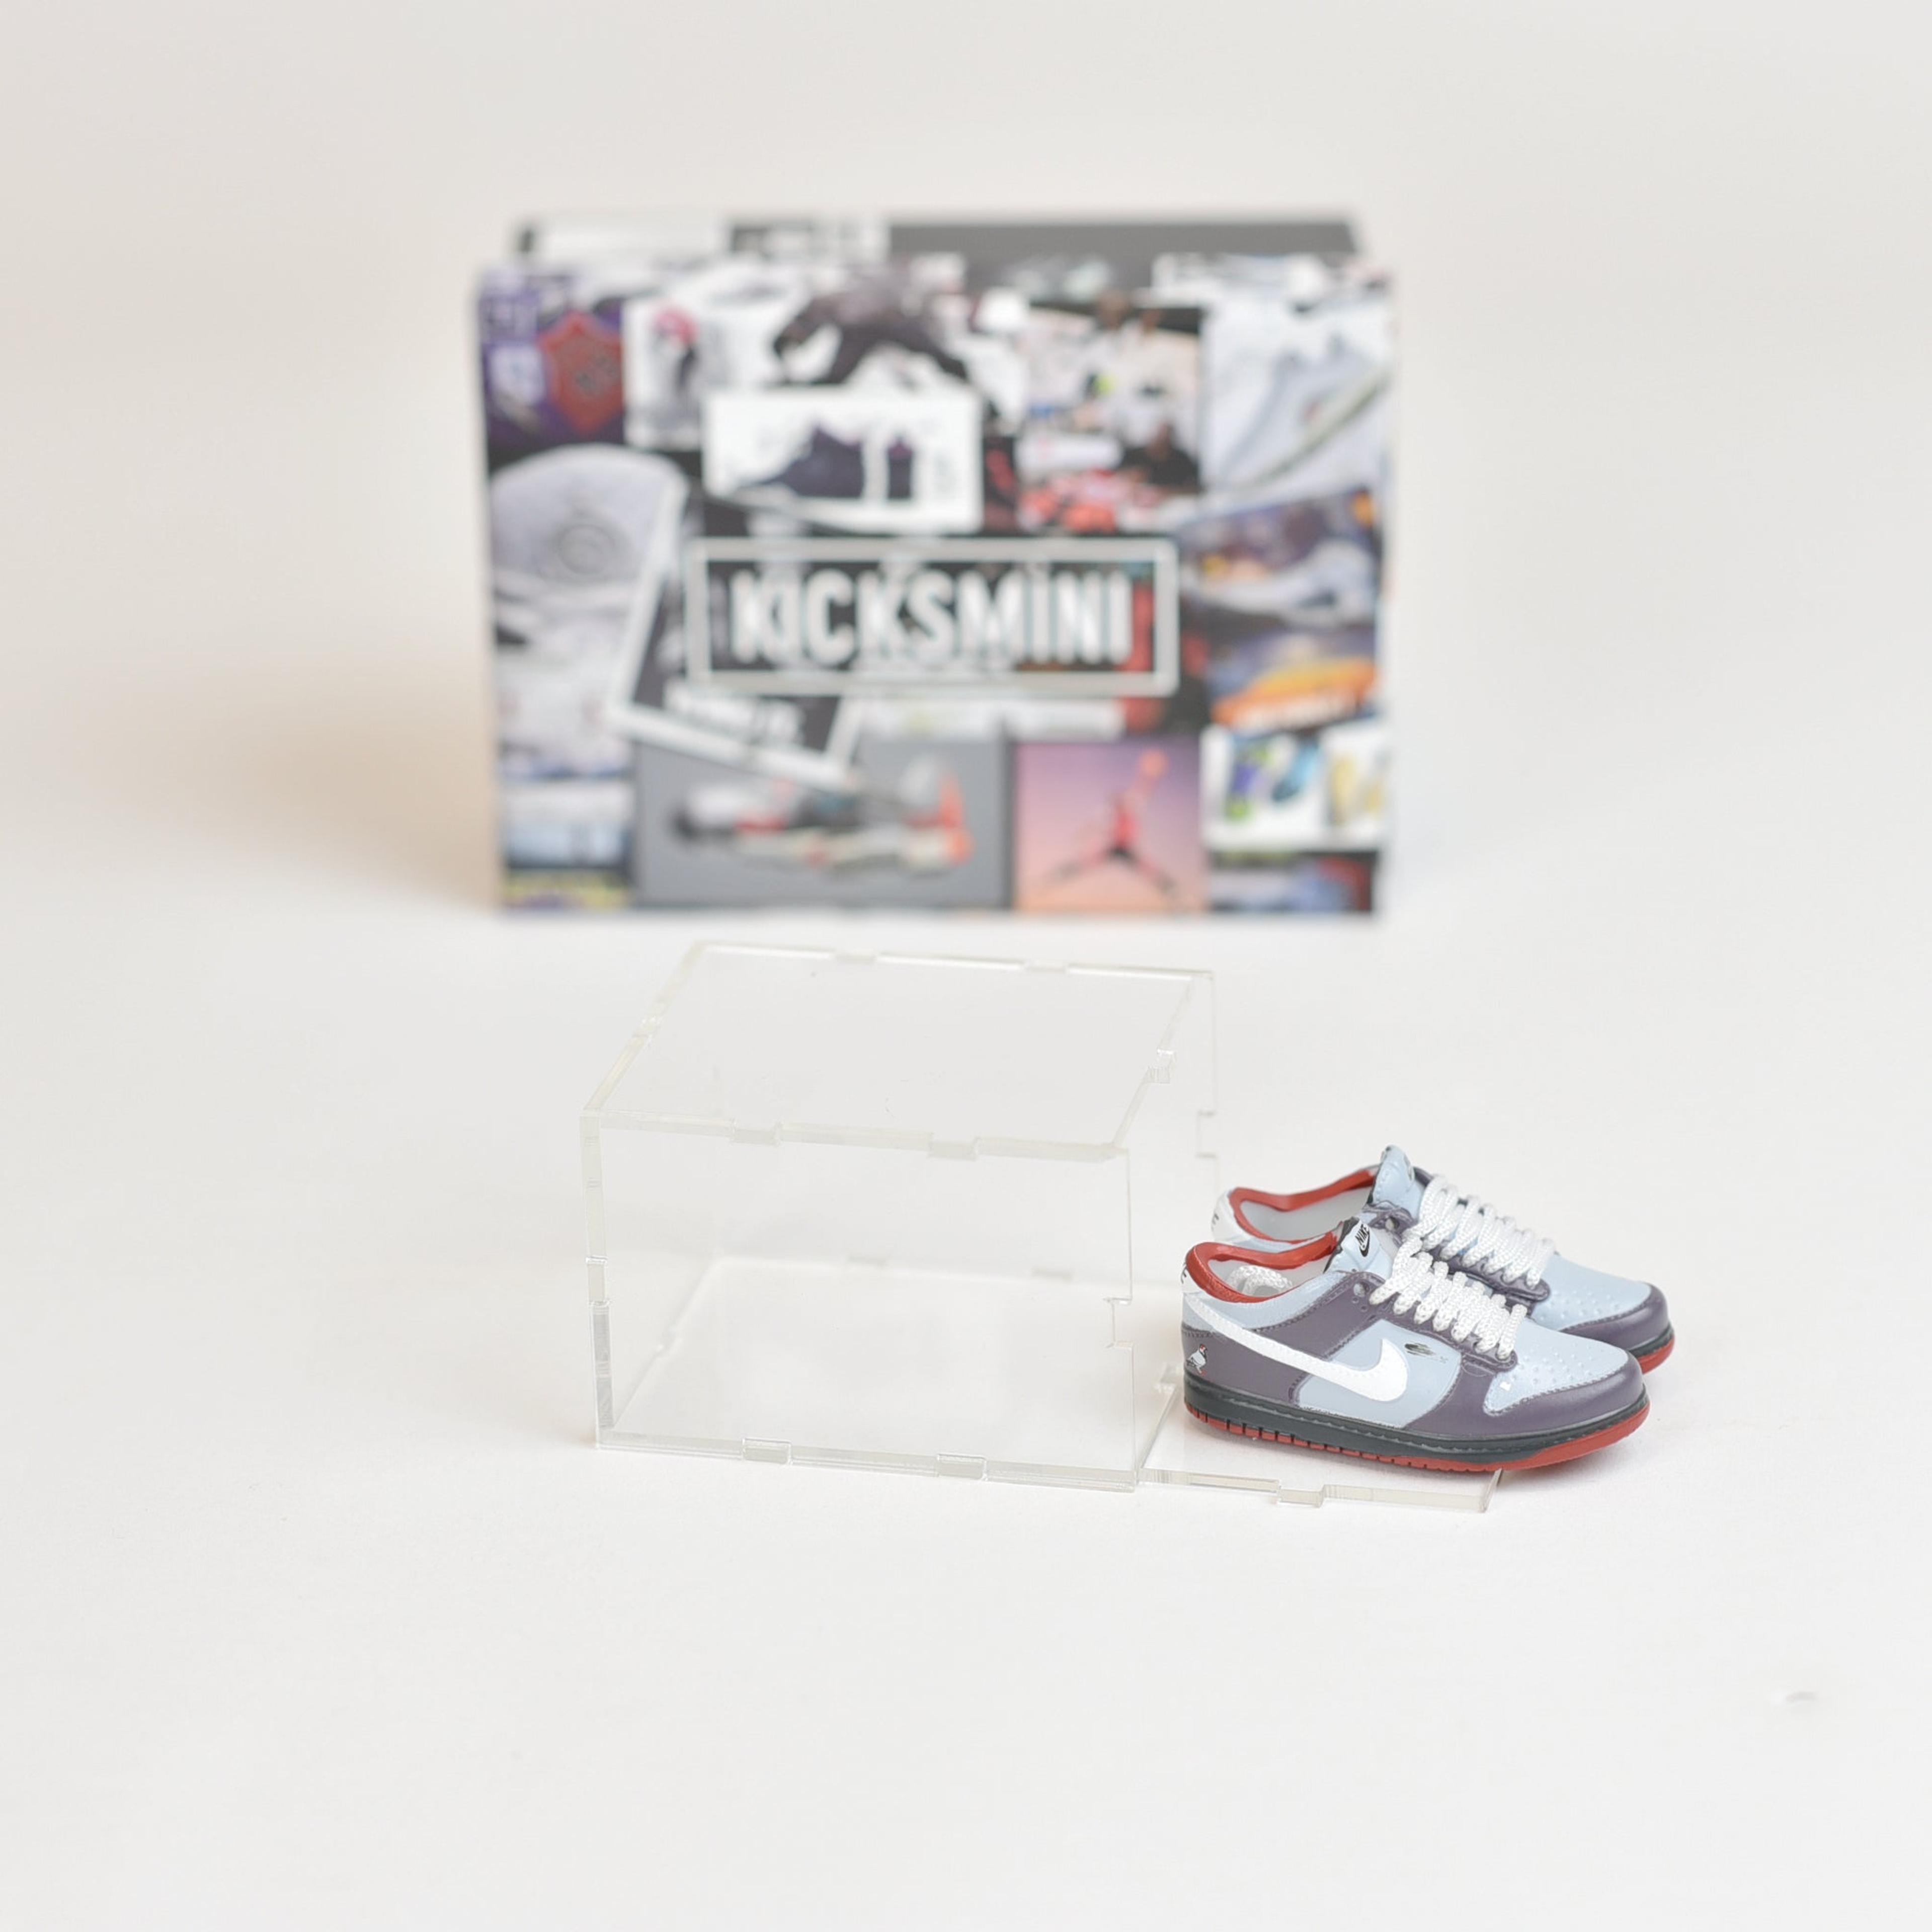 Alternate View 22 of SB Dunk Low Collaboration Mini Sneakers with Display Case